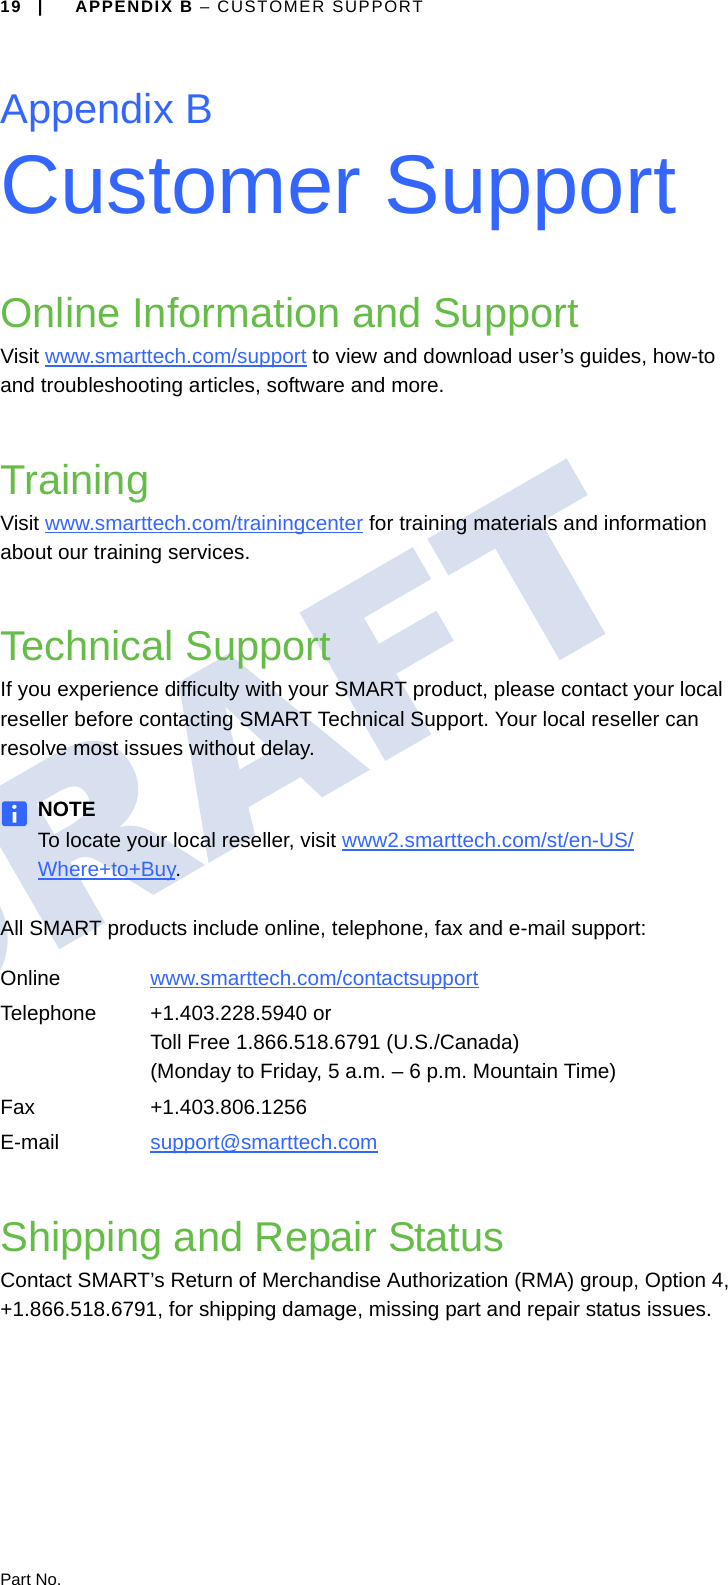 Part No.19 | APPENDIX B – CUSTOMER SUPPORTAppendix BCustomer SupportOnline Information and SupportVisit www.smarttech.com/support to view and download user’s guides, how-to and troubleshooting articles, software and more.TrainingVisit www.smarttech.com/trainingcenter for training materials and information about our training services.Technical SupportIf you experience difficulty with your SMART product, please contact your local reseller before contacting SMART Technical Support. Your local reseller can resolve most issues without delay.NOTETo locate your local reseller, visit www2.smarttech.com/st/en-US/Where+to+Buy.All SMART products include online, telephone, fax and e-mail support:Shipping and Repair StatusContact SMART’s Return of Merchandise Authorization (RMA) group, Option 4, +1.866.518.6791, for shipping damage, missing part and repair status issues.Online www.smarttech.com/contactsupport Telephone +1.403.228.5940 orToll Free 1.866.518.6791 (U.S./Canada)(Monday to Friday, 5 a.m. – 6 p.m. Mountain Time)Fax +1.403.806.1256E-mail support@smarttech.com 